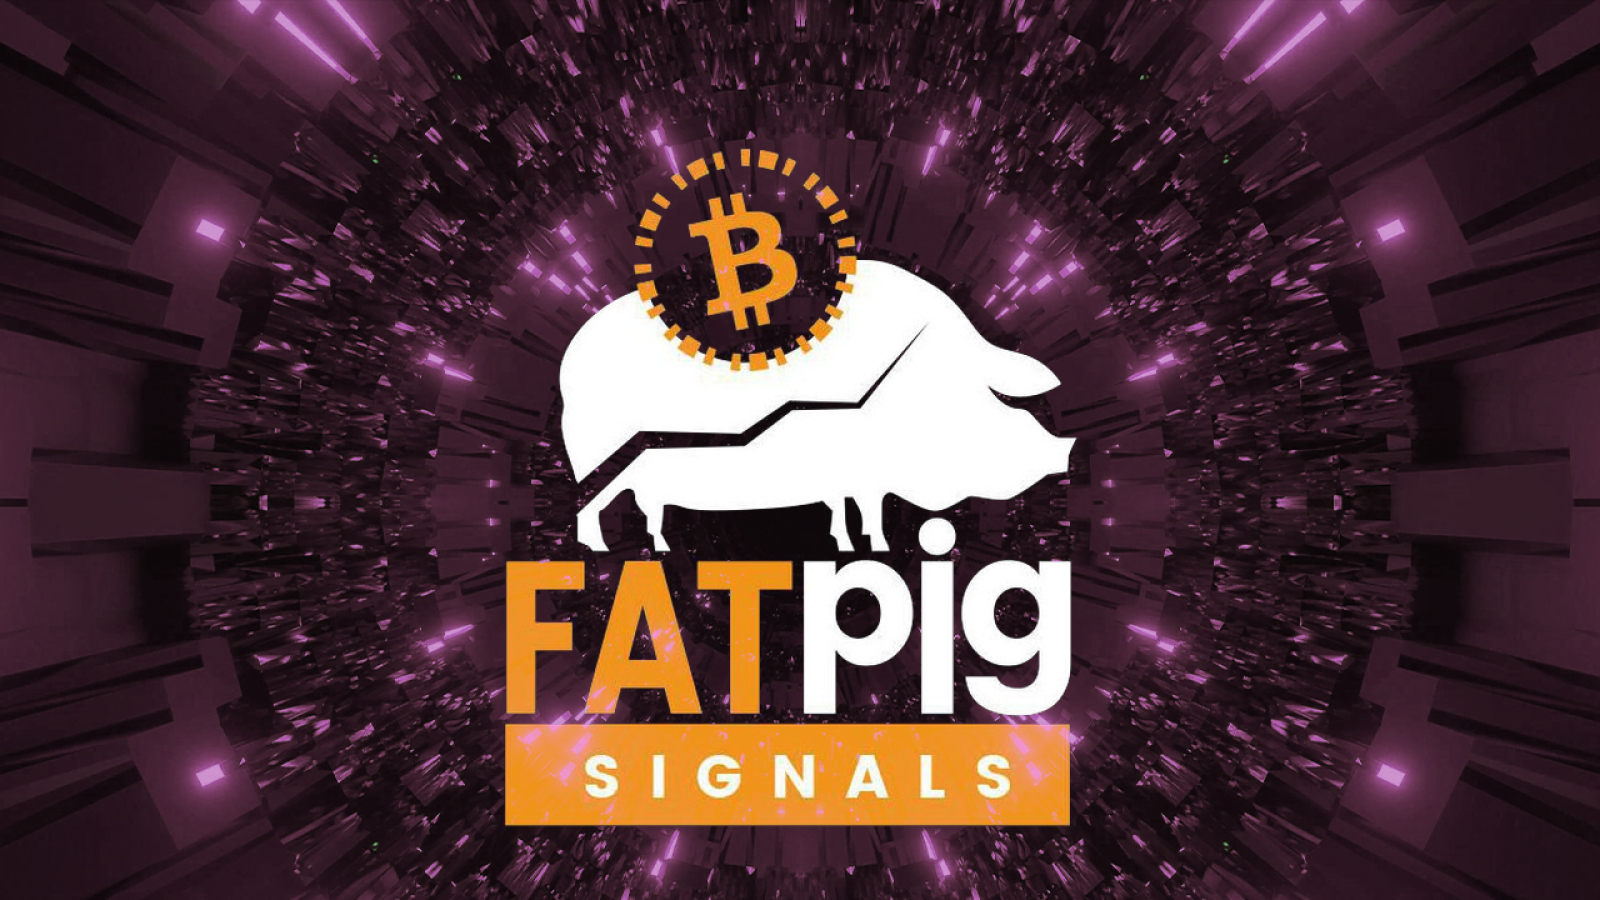 Fat Pig Signals Informs Its Members About Latest Changes on Crypto Market